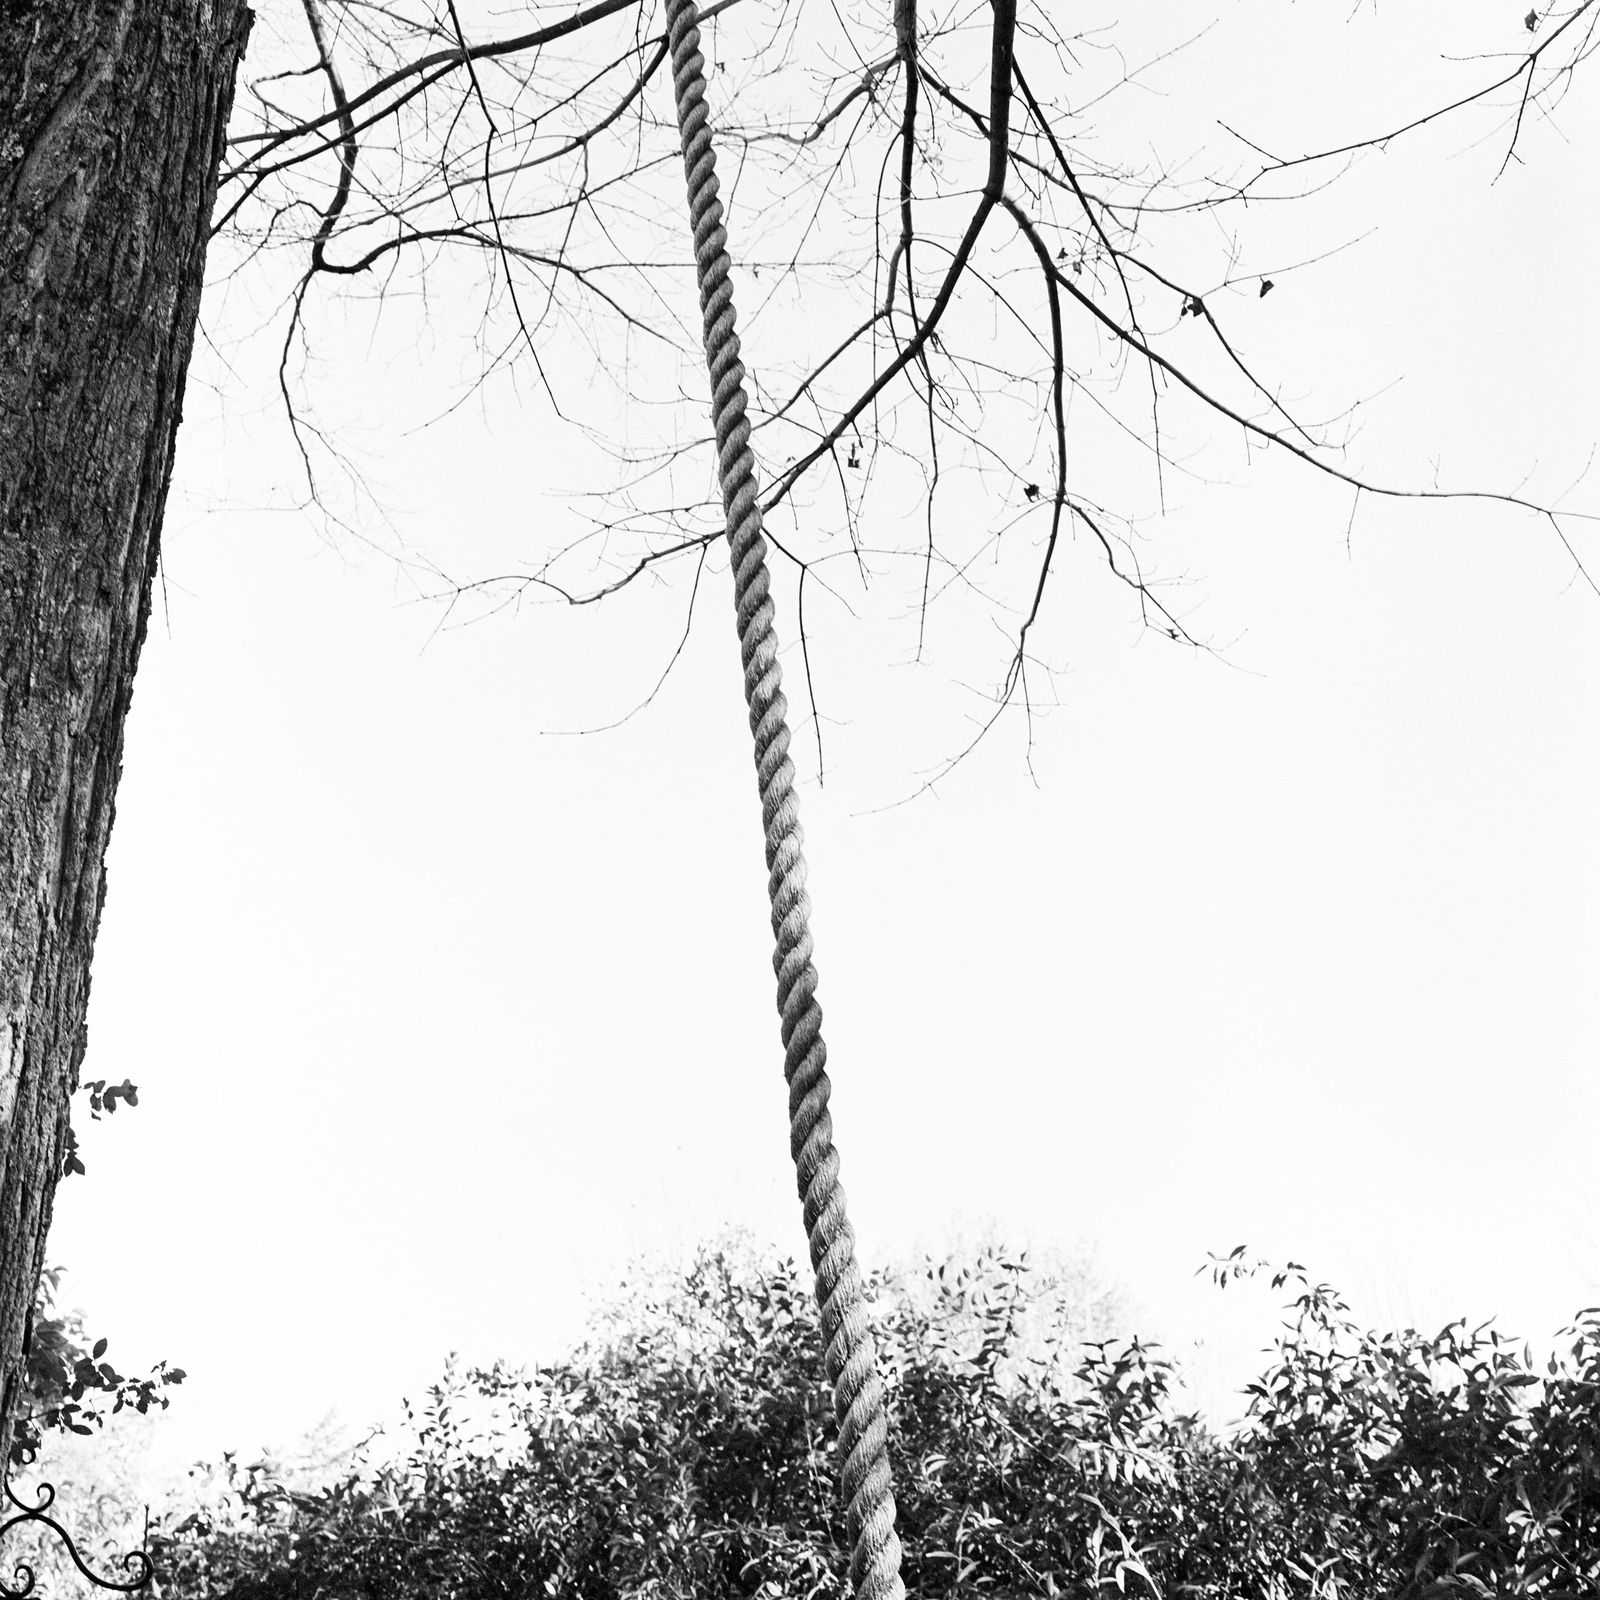 © Isabella Convertino - Holly Hill Rope Swing, 2018. Archival Pigment Print, 7.5in x 7.5in.